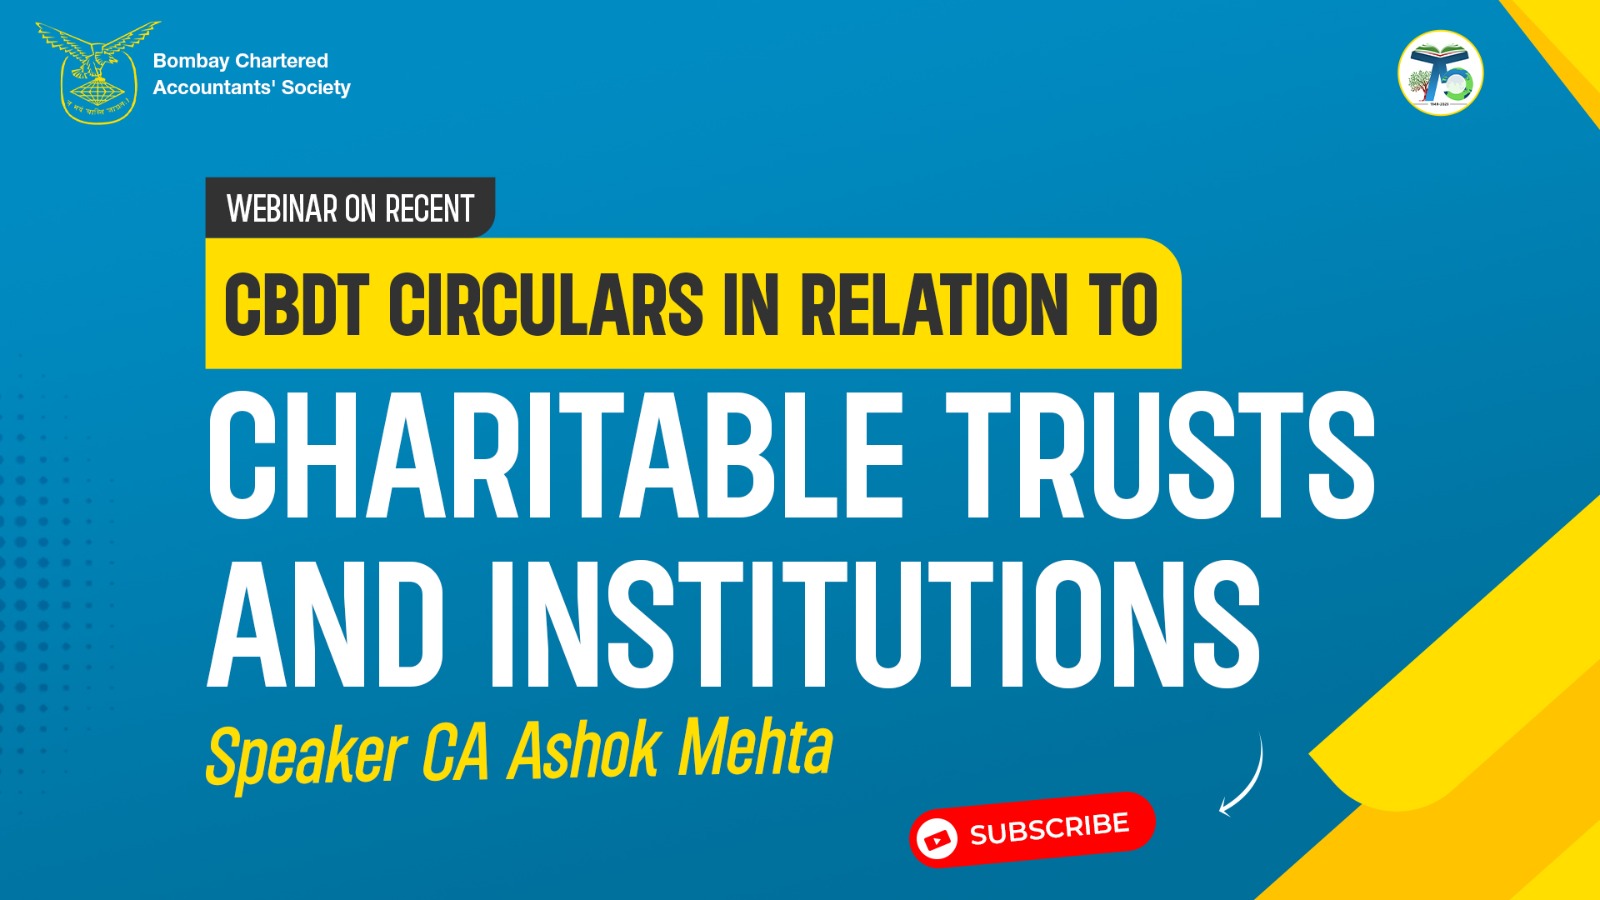 Webinar on Recent CBDT Circulars in relation to Charitable Trusts and Institutions